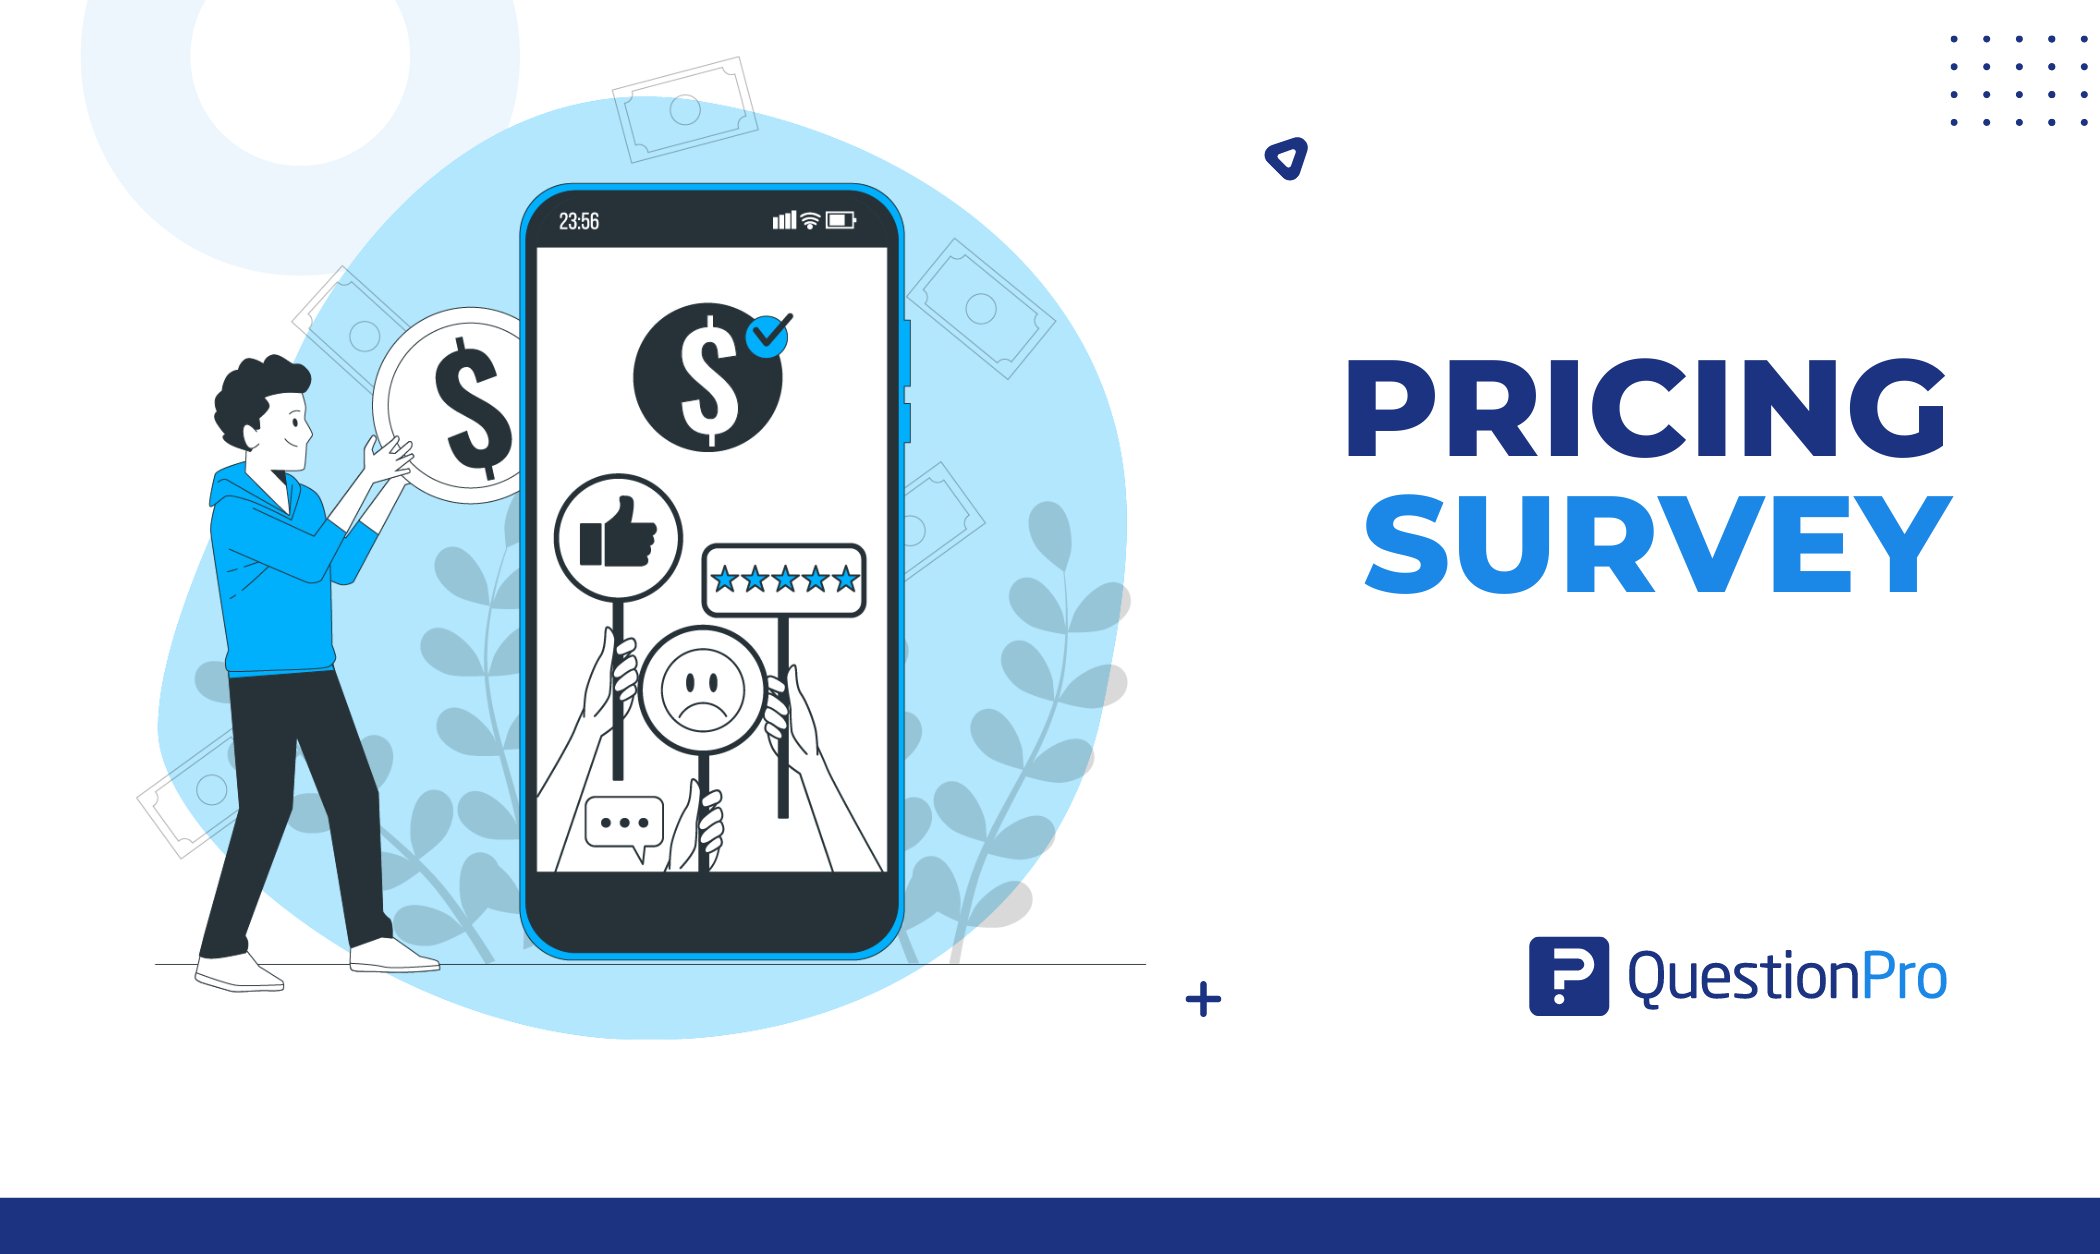 A pricing survey is vital to ensure you accurately price your products. Good pricing surveys will show what drives customers' purchases.